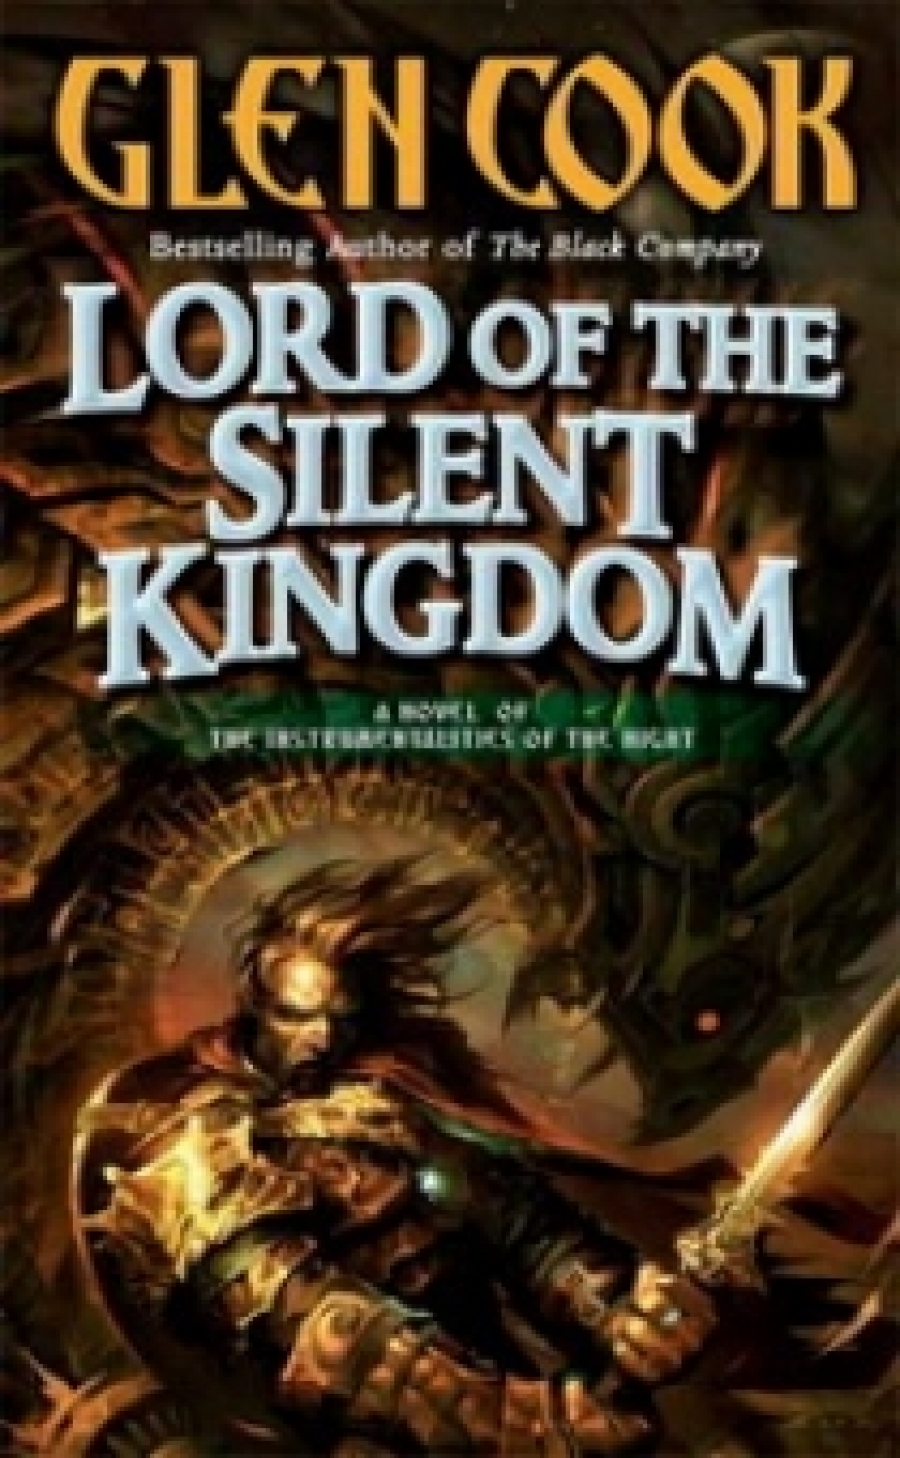 Glen C. Lord of the Silent Kingdom (Instrumentalities of the Night 2) 